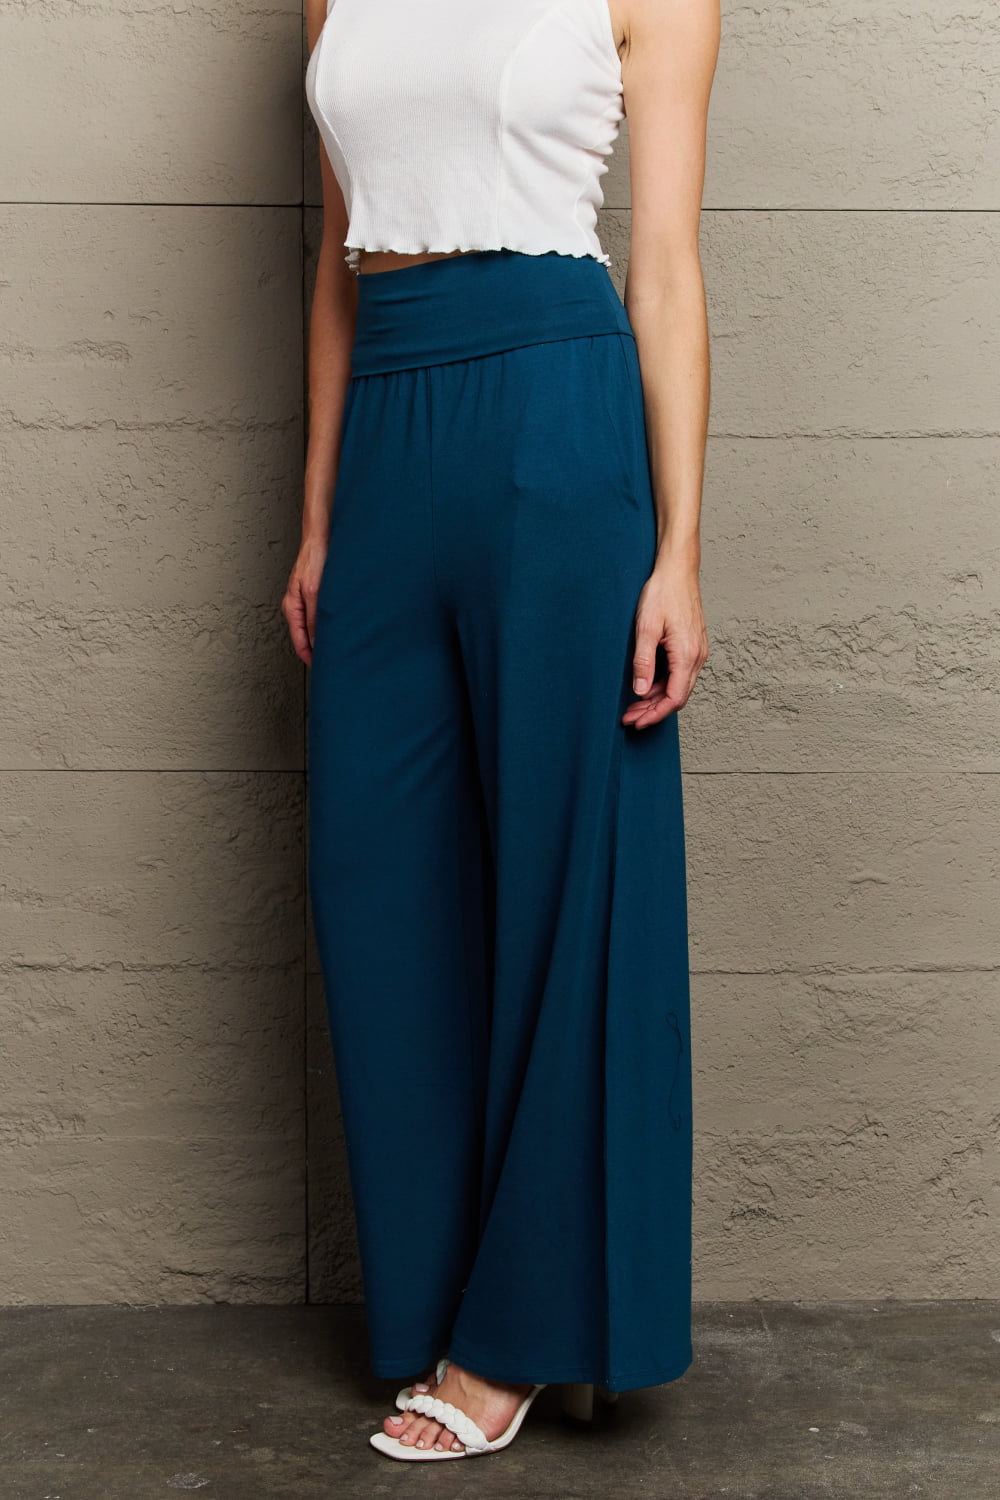 Deep teal palazzo pants with side pockets, side view